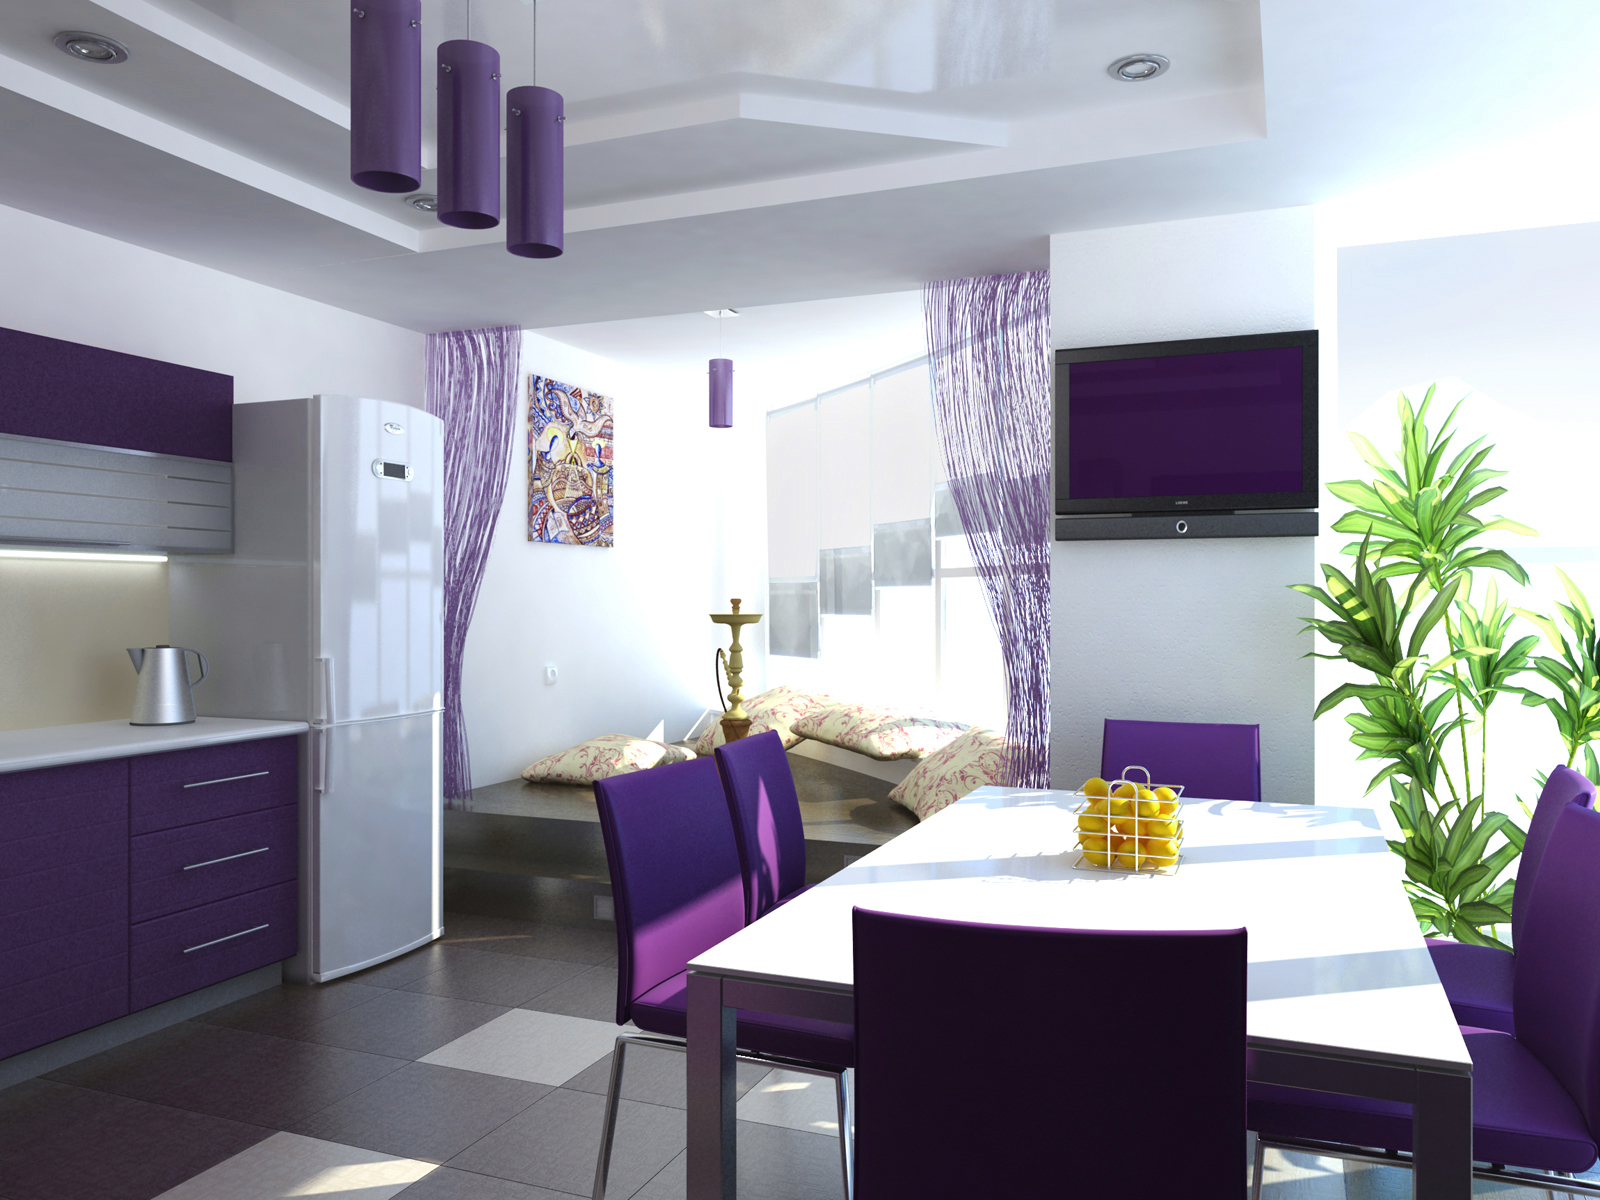 Purple chairs in the kitchen